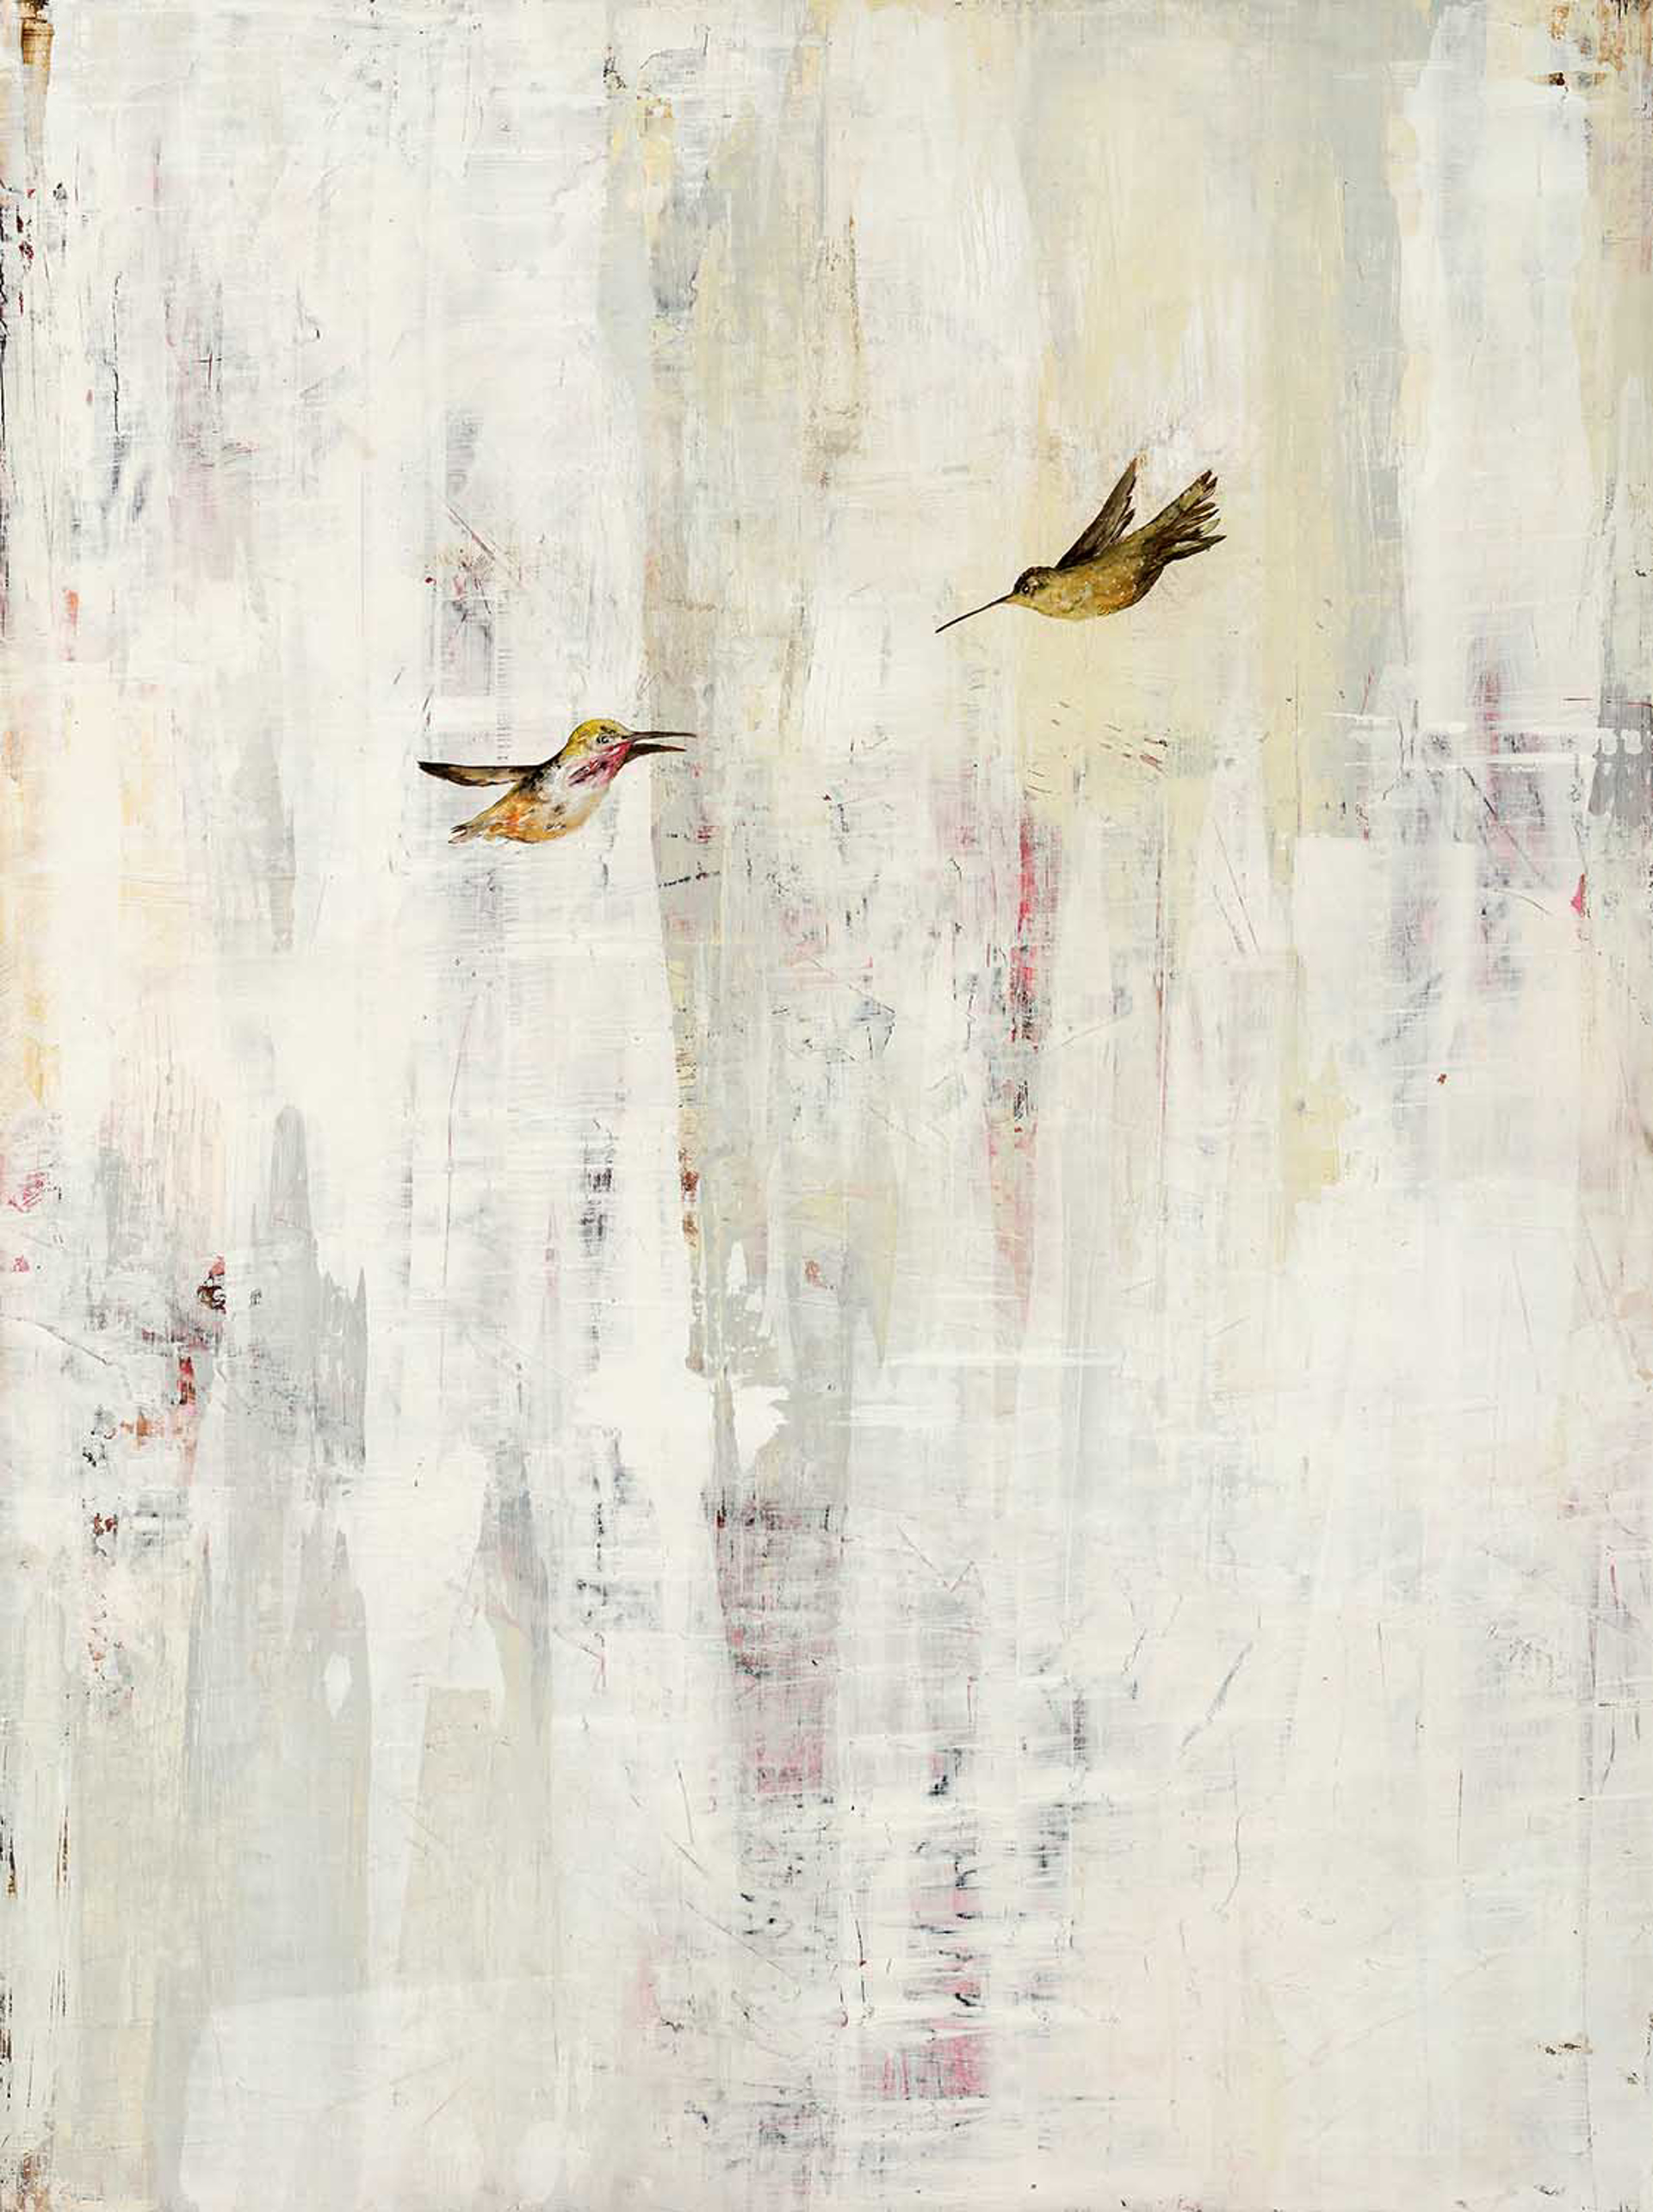 Oil Painting Of Two Humming Birds In Flight On A Light Toned Textured Background, Fine Art By Jenna Von Benedikt, Available At Gallery Wild